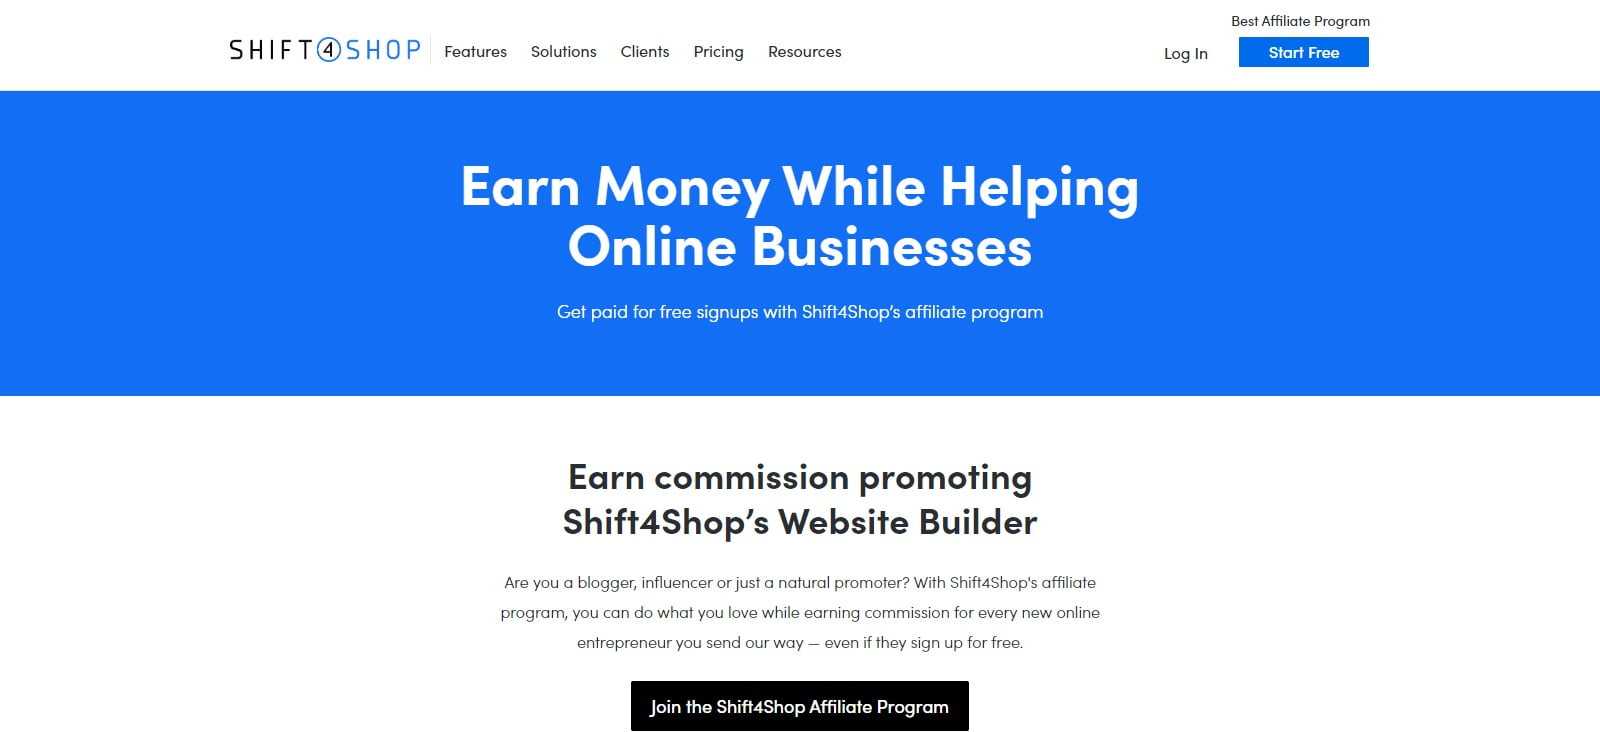 3dcart Affiliates Program Review: 300% Commission for The First Month